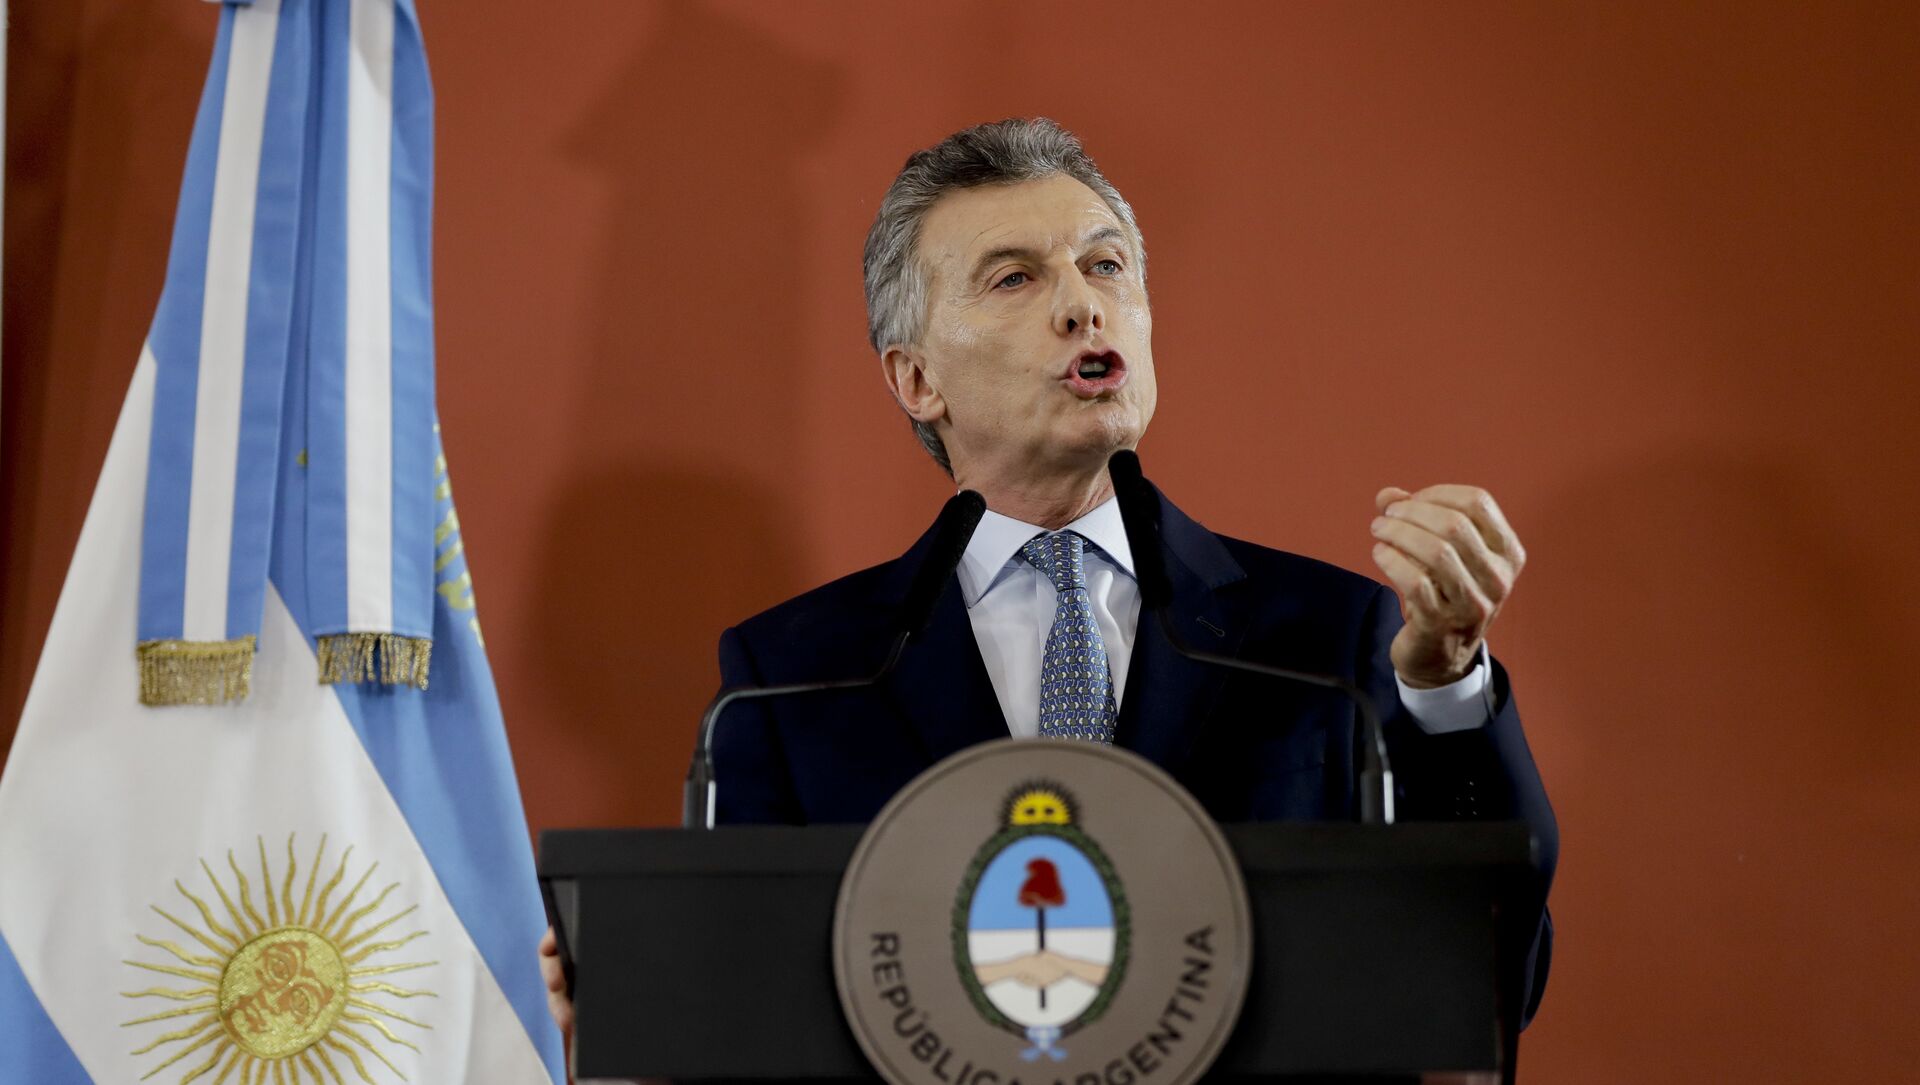 Argentina's President Mauricio Macri speaks from the government house in Buenos Aires, Argentina Thursday, Sept. 27, 2018. - Sputnik International, 1920, 09.07.2021